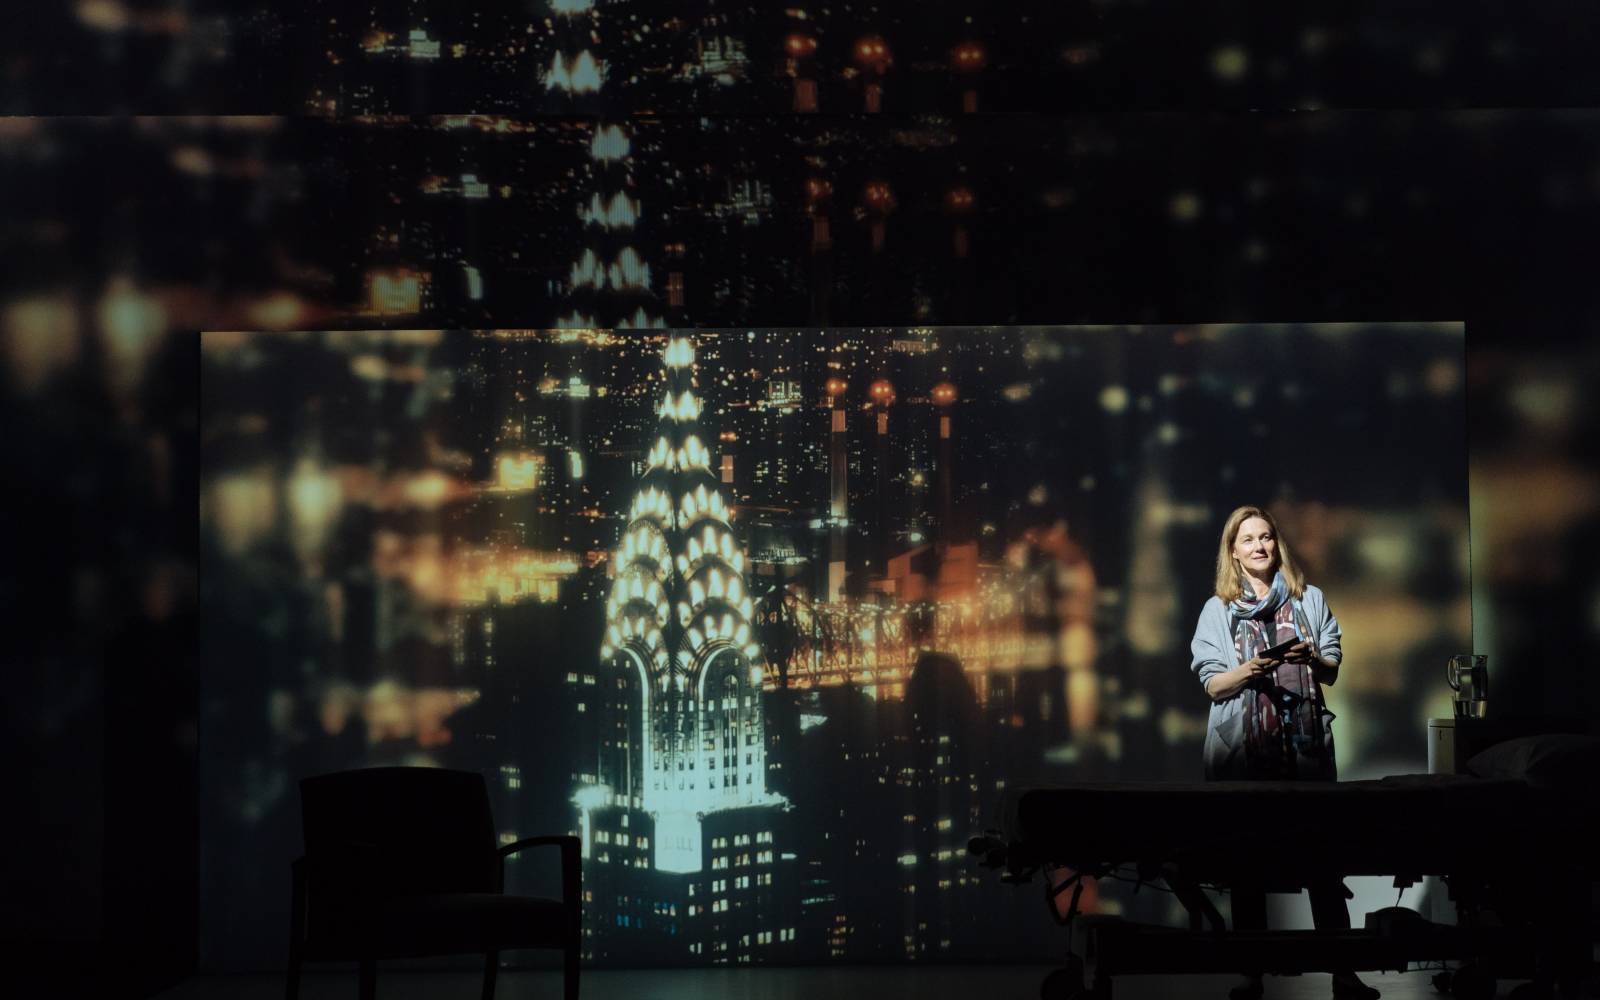 Laura Linney gazes wistfully out of frame, standing in front of a projection of the New York City skyline at night